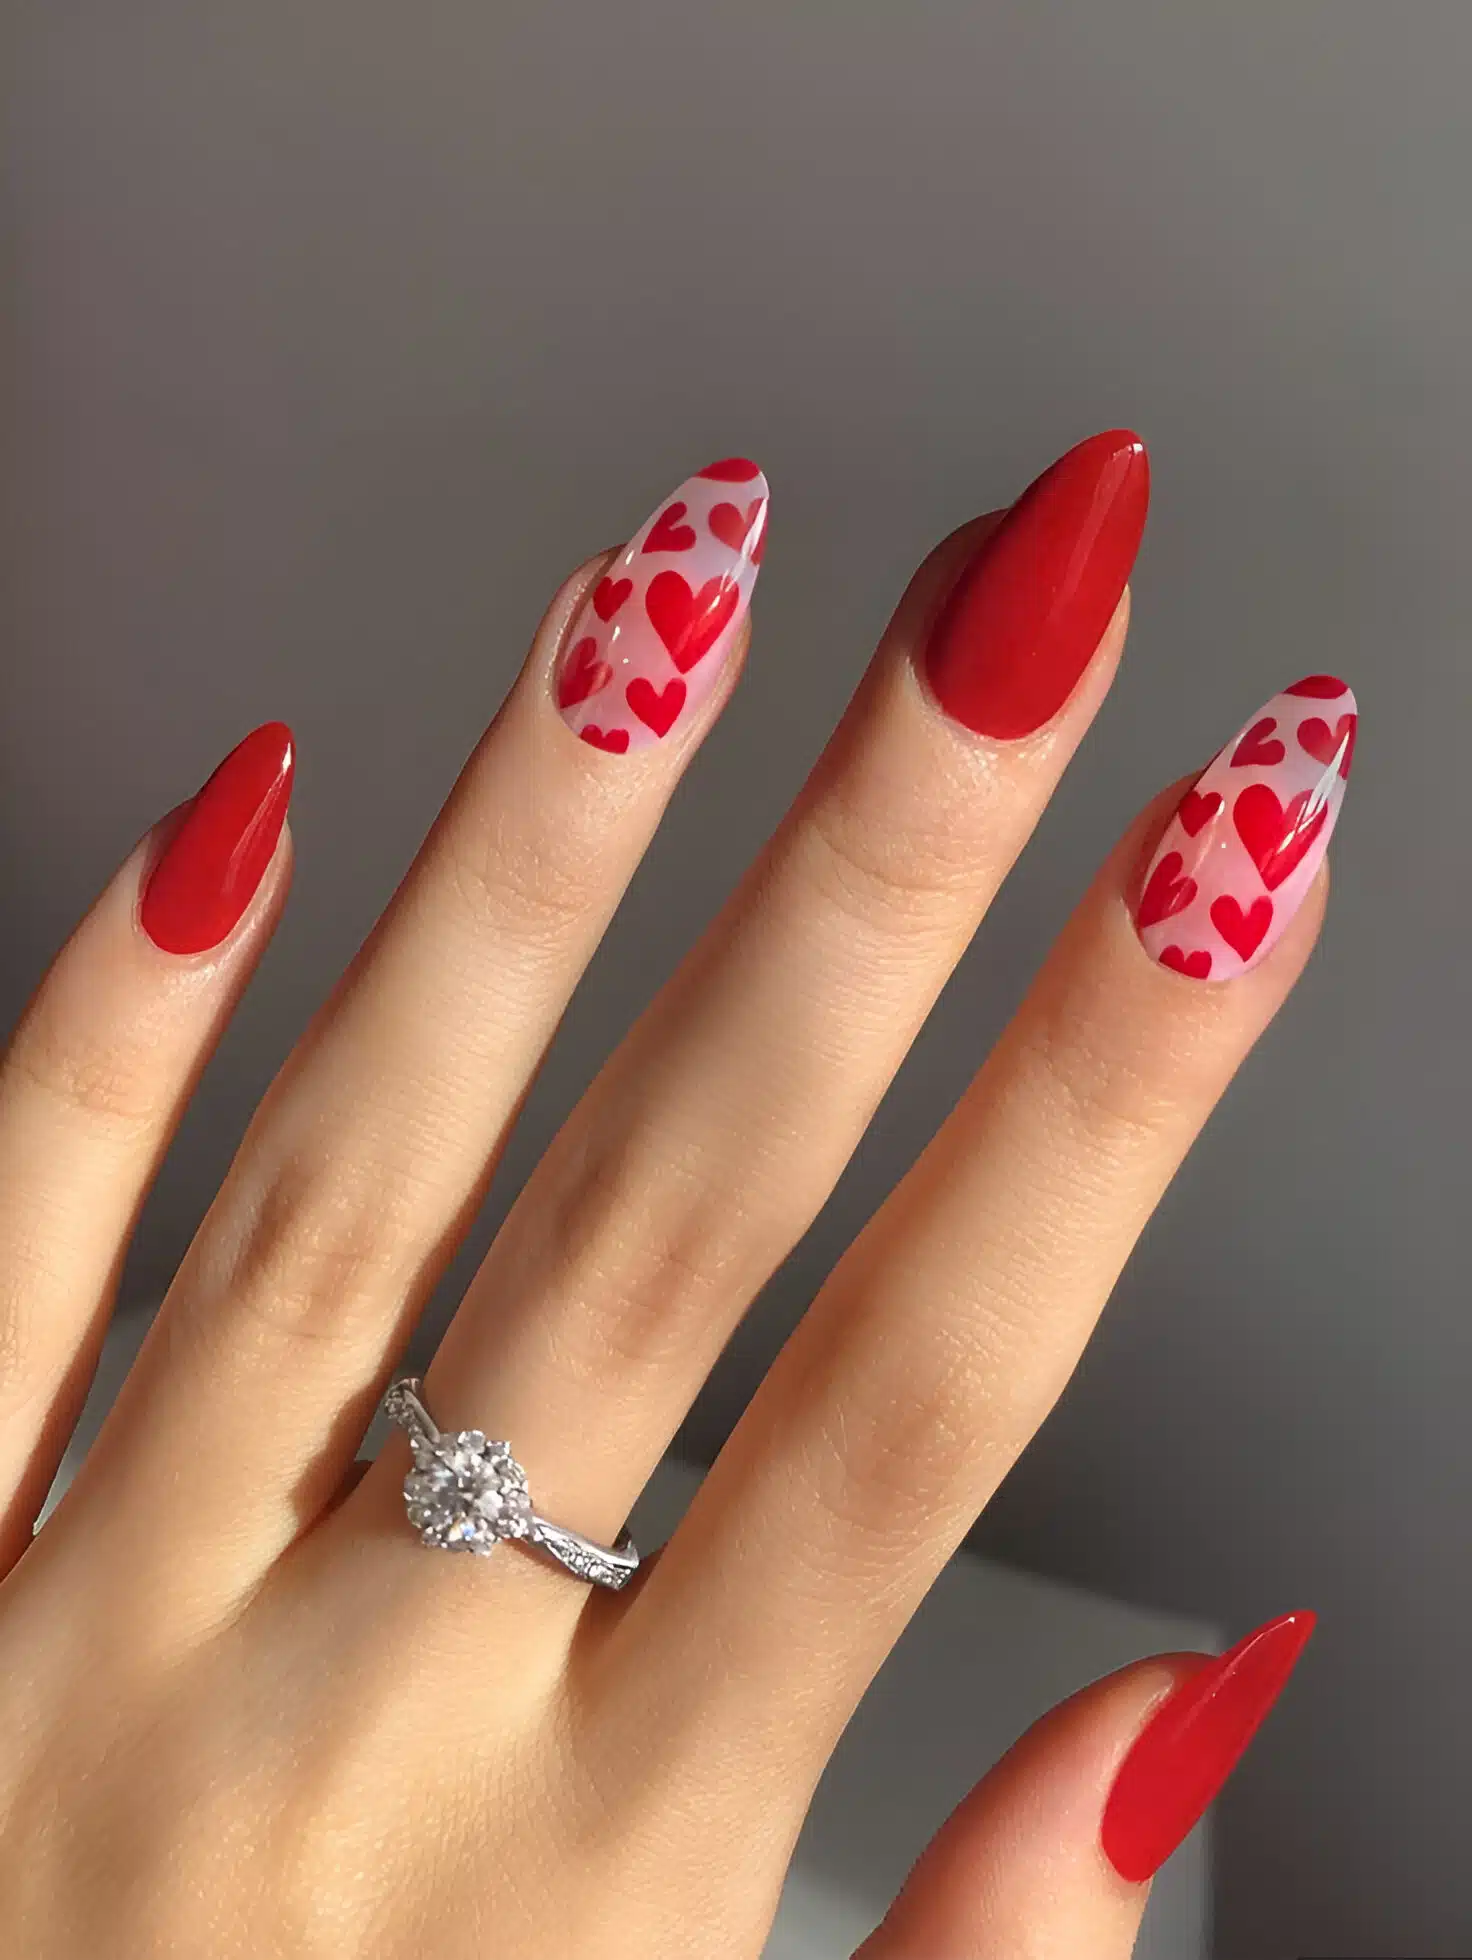 40 Gorgeous Heart Manicures Romantic Ladies Need To Copy ASAP 28